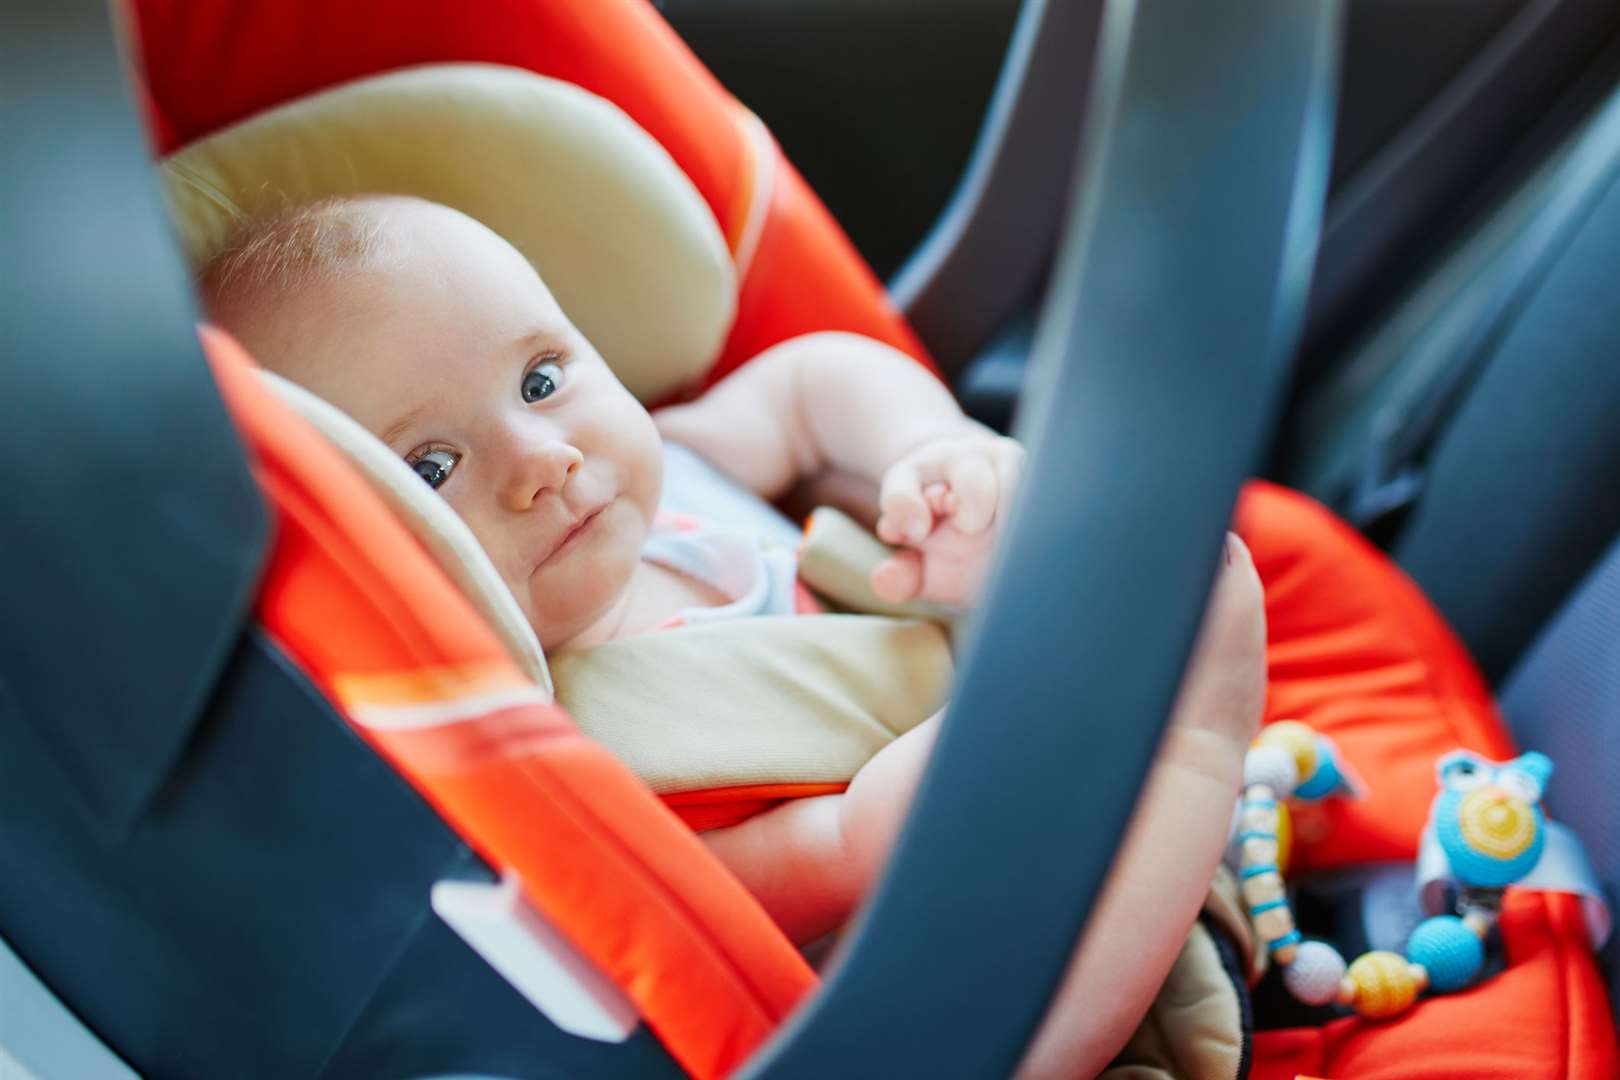 Car seats are based on height or weight - with weight-based car seats classified by a group number